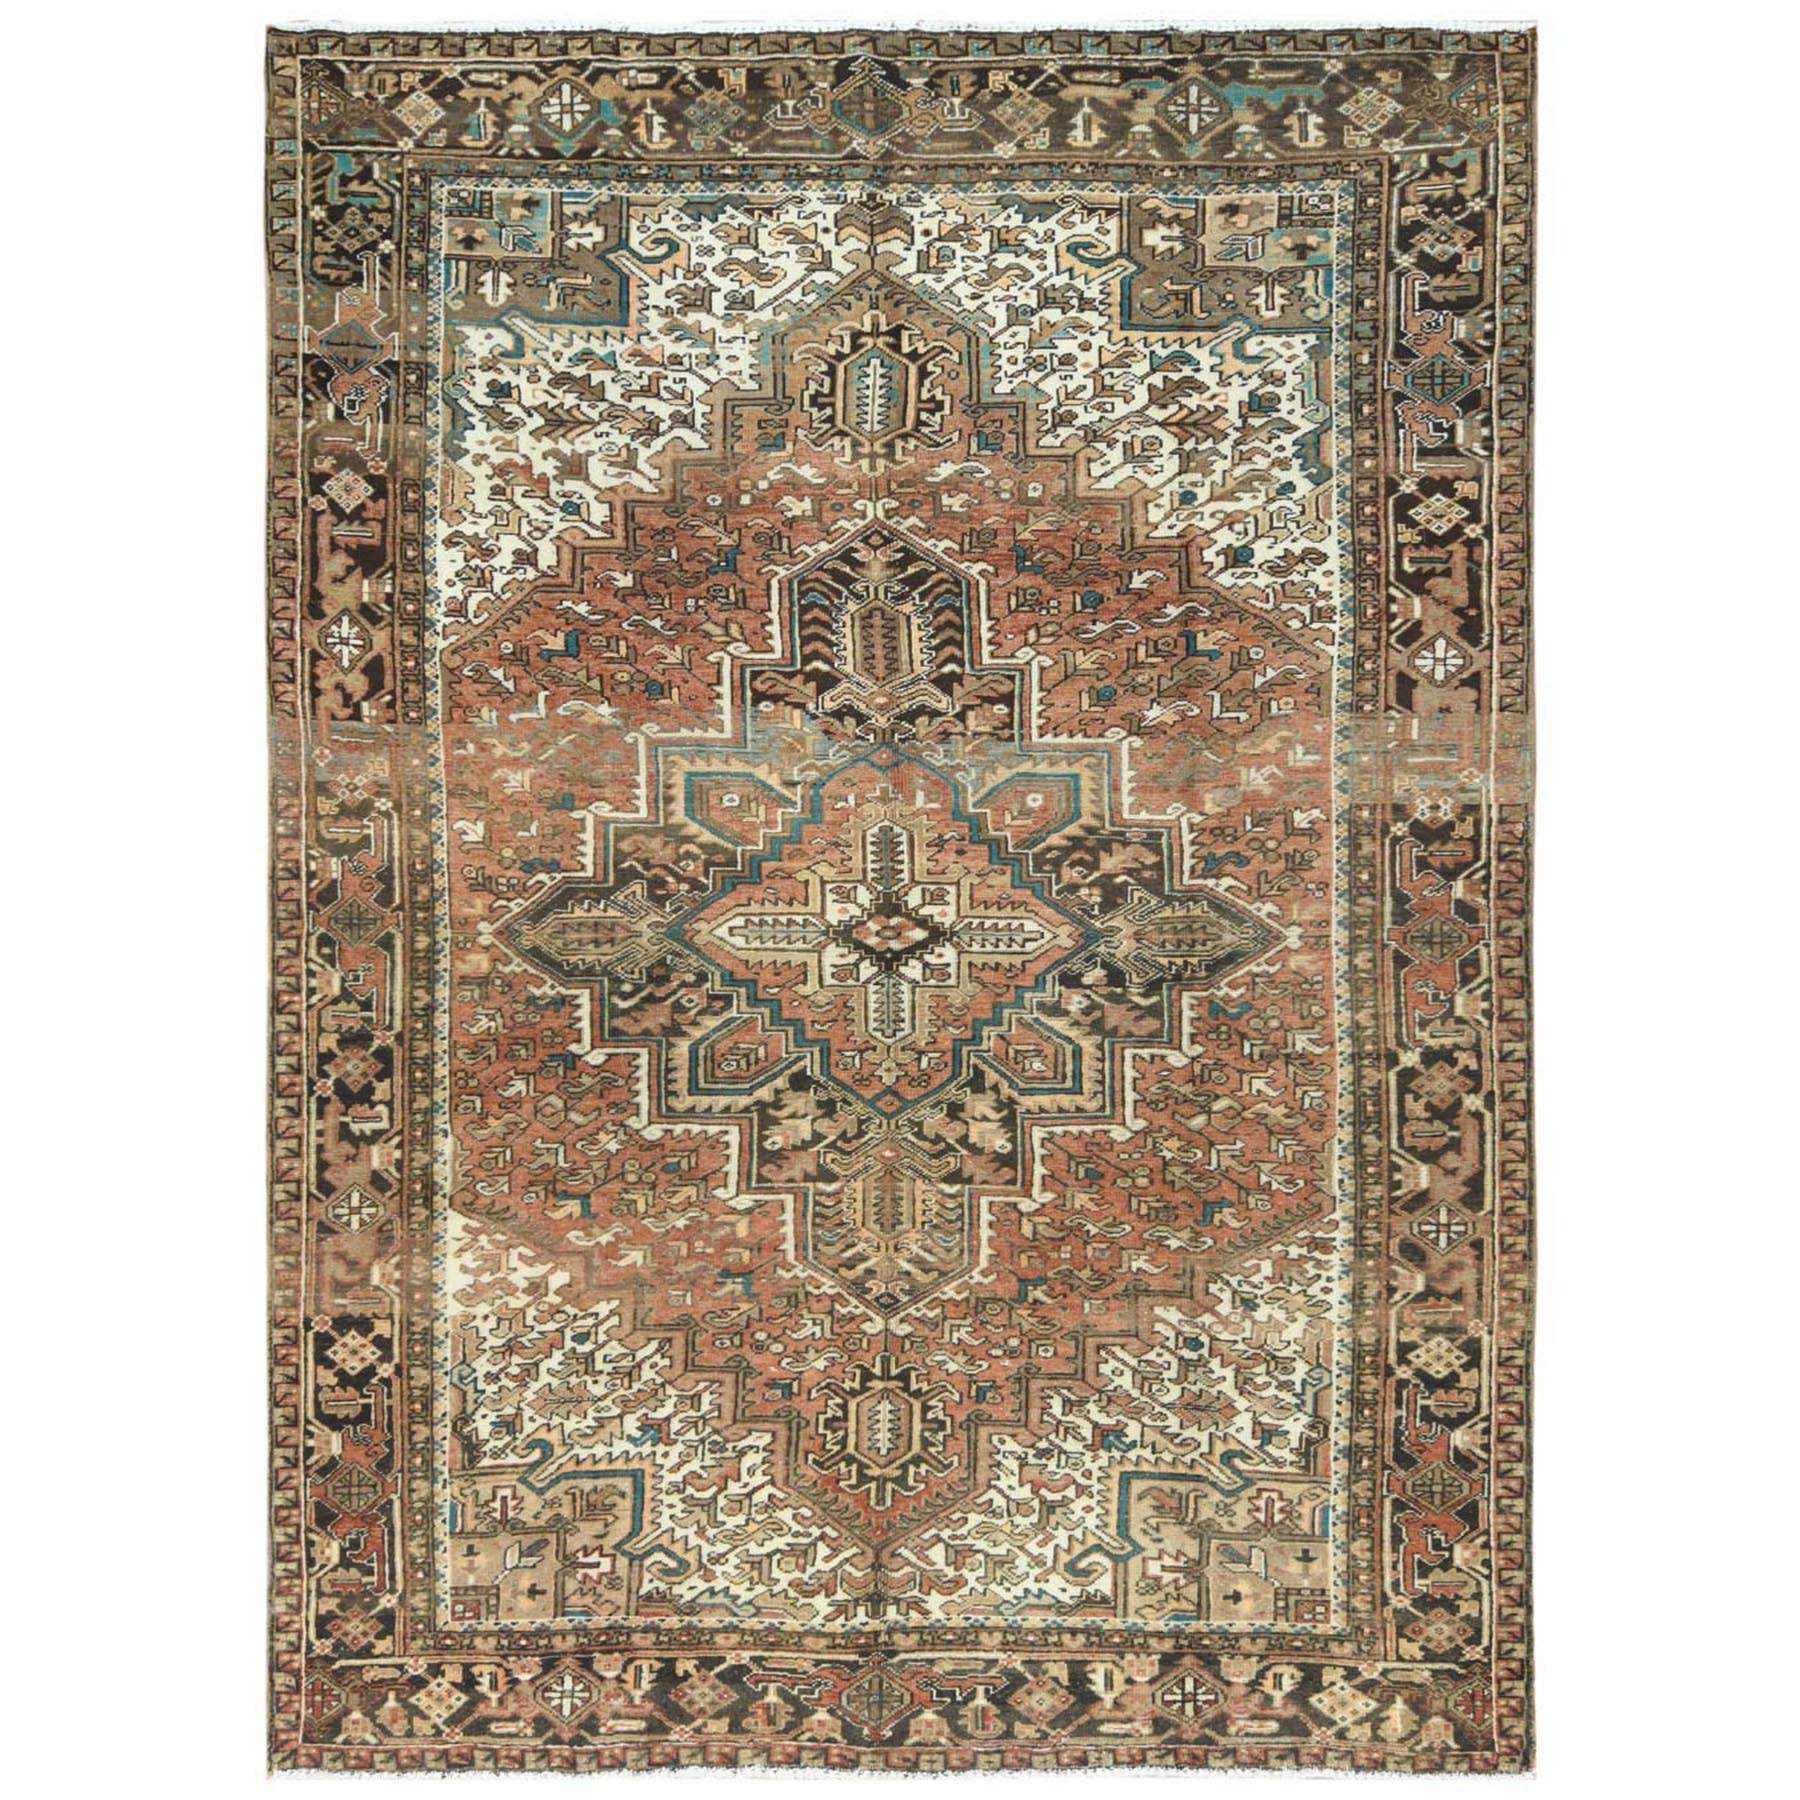  Wool Hand-Knotted Area Rug 7'9